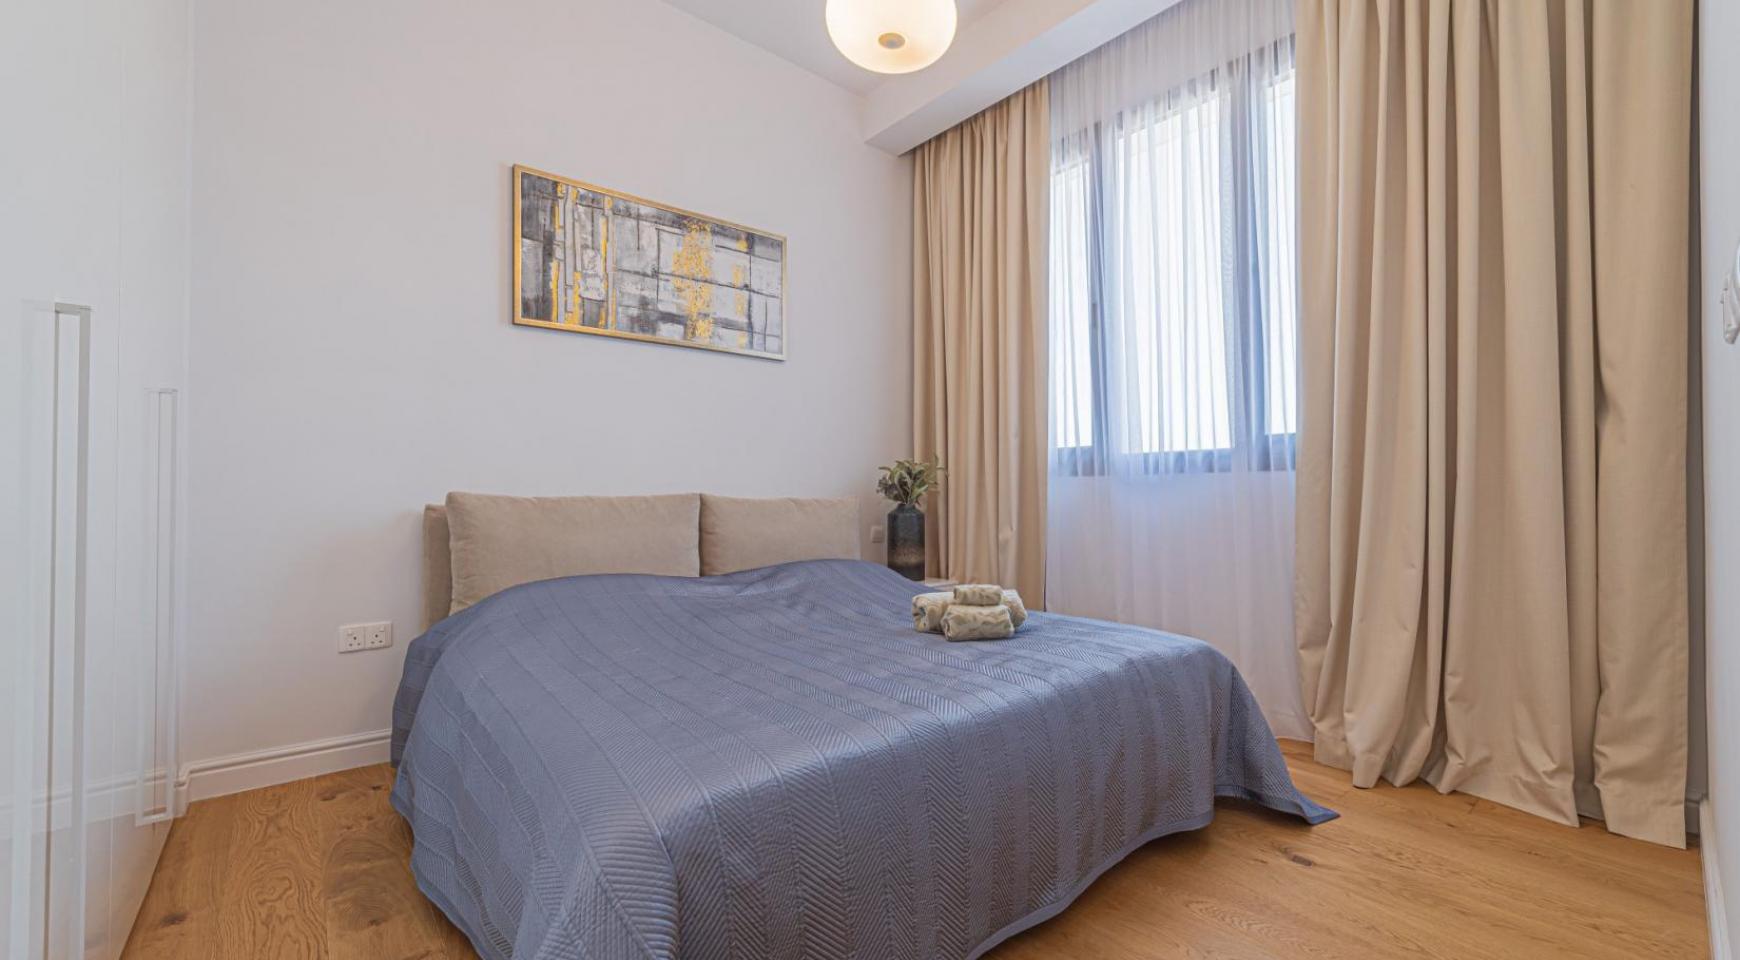 Hortensia Residence, Apt. 202. 2 Bedroom Apartment within a New Complex near the Sea  - 59